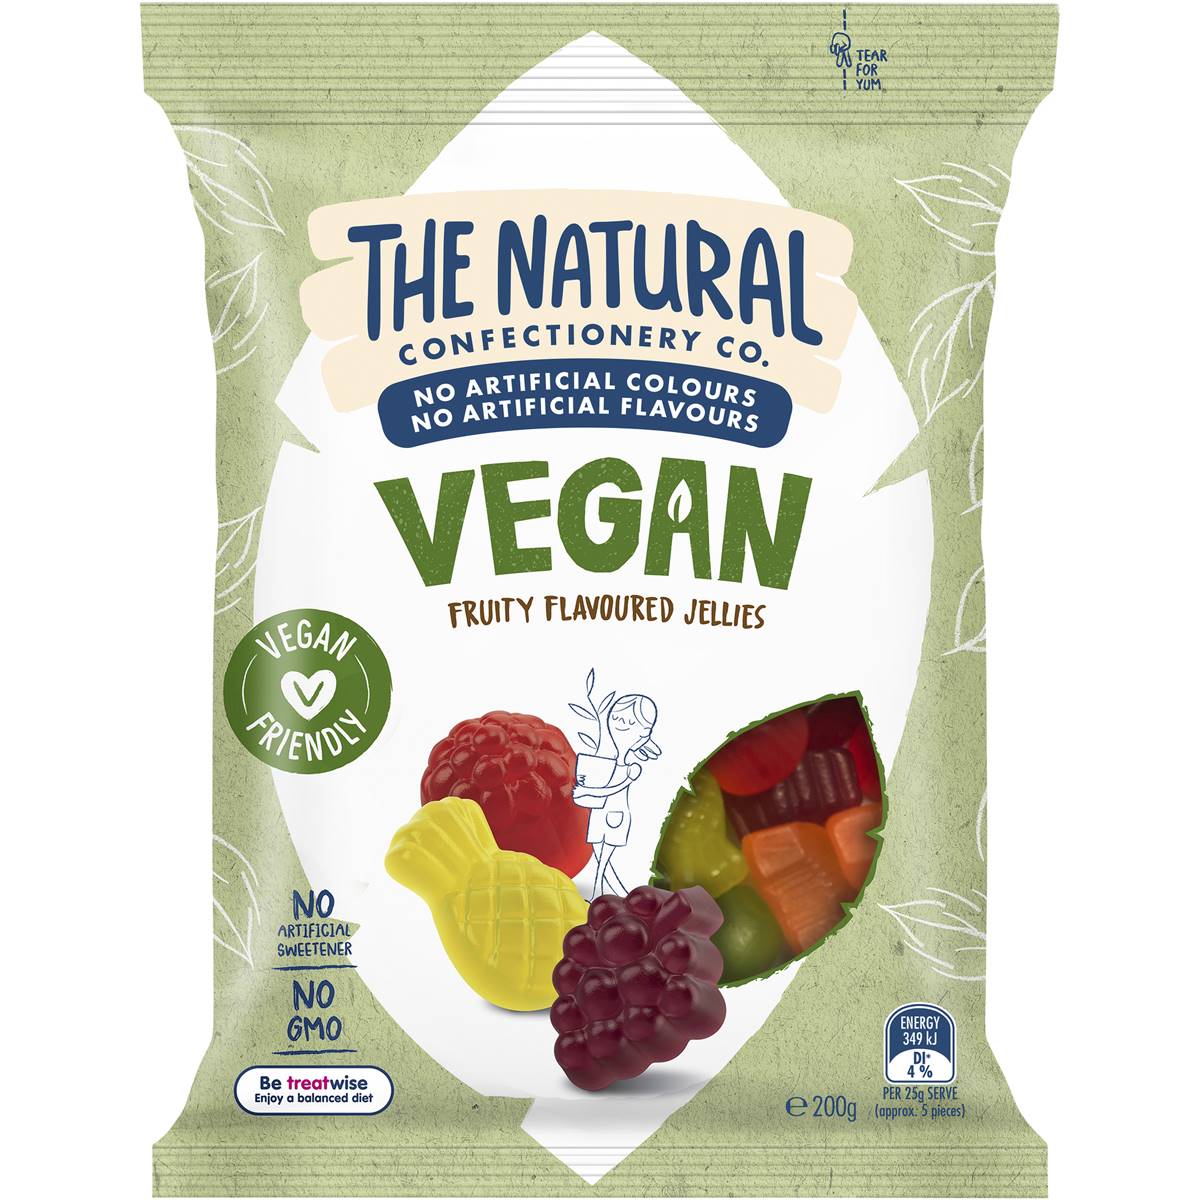 Calories in The Natural Confectionery Co. Vegan Fruity Flavoured Lollies